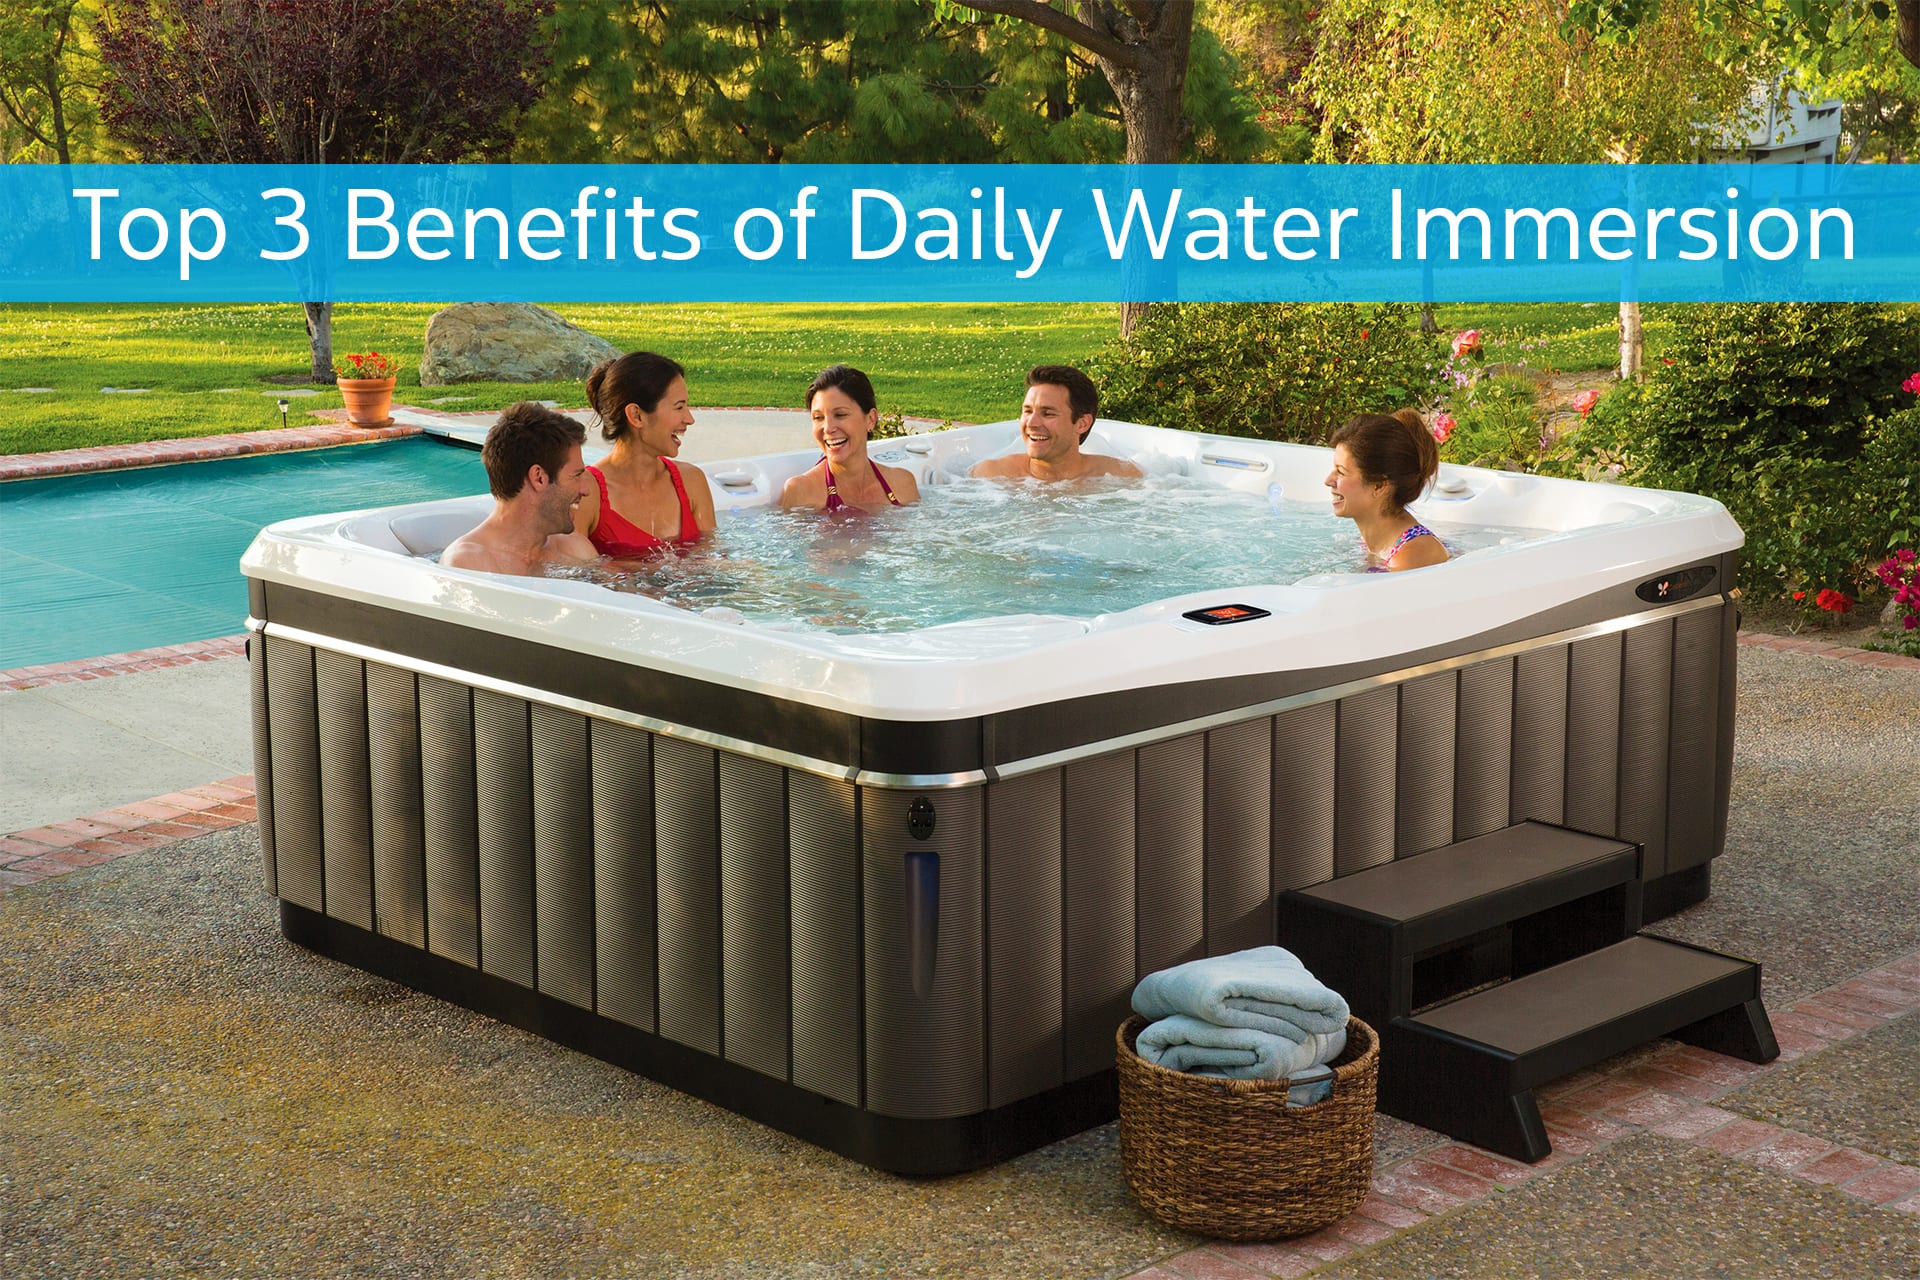 Top 3 Benefits of Daily Water Immersion